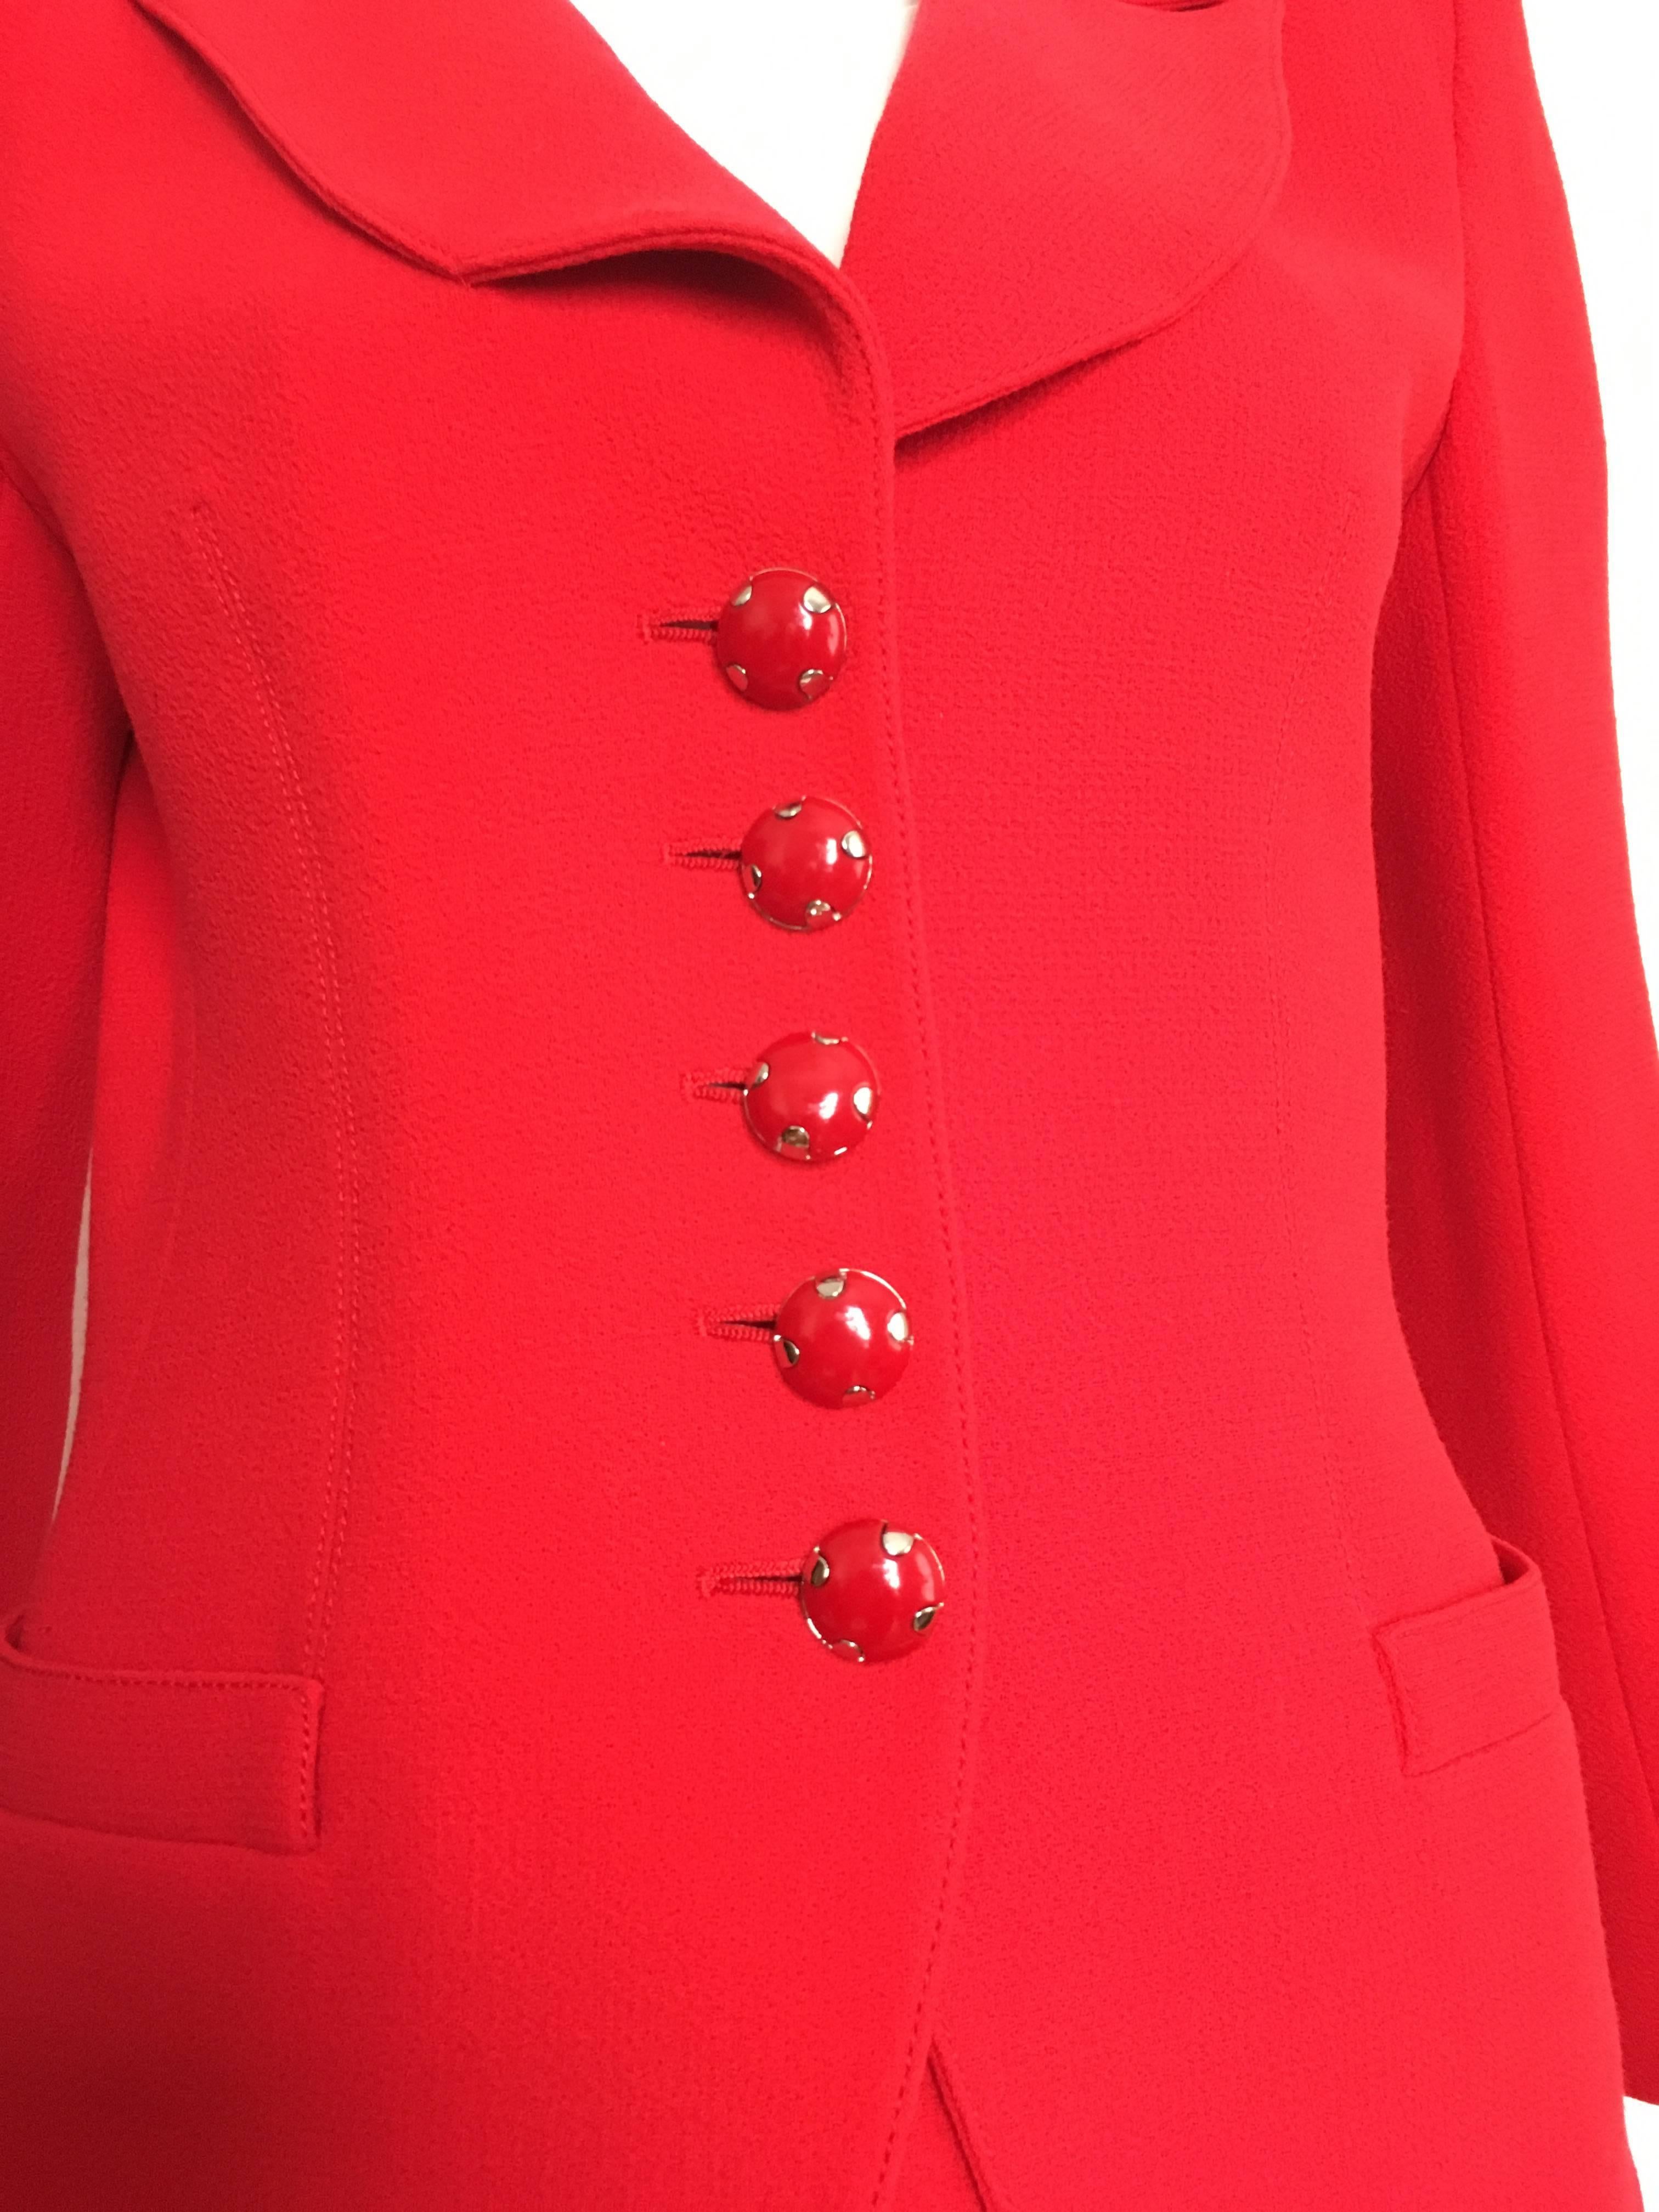 Emanuel Ungaro Red Power Wool Crepe Suit Size 6, 1990s In Excellent Condition For Sale In Atlanta, GA